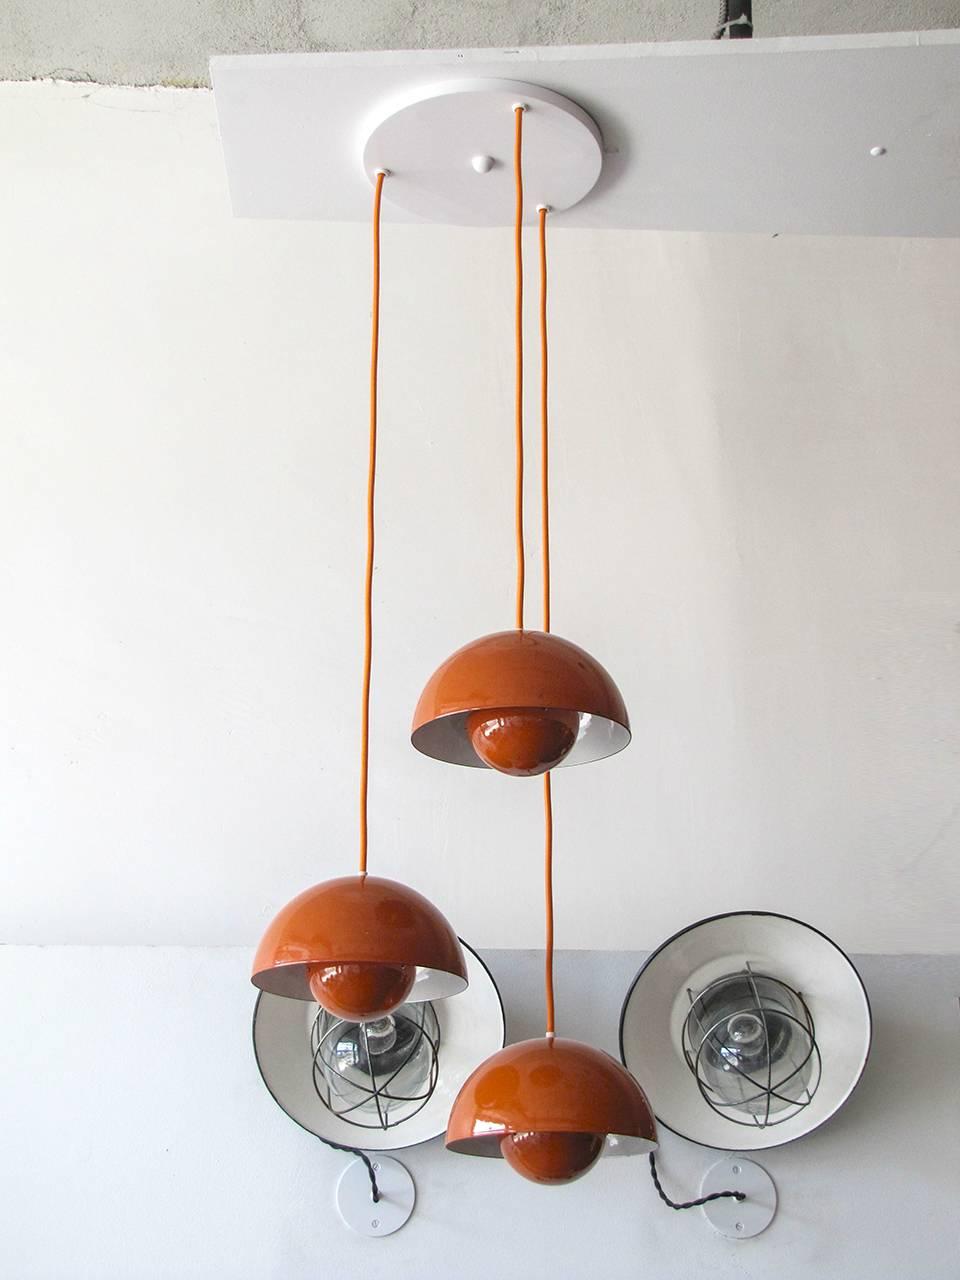 Wonderful 1970s flower pot hanging lights by Verner Panton for Louis Poulsen, three orange enameled pieces with matching colored cords on a single canopy, insides of the reflector spheres is orange, heights are adjustable, a total of seven